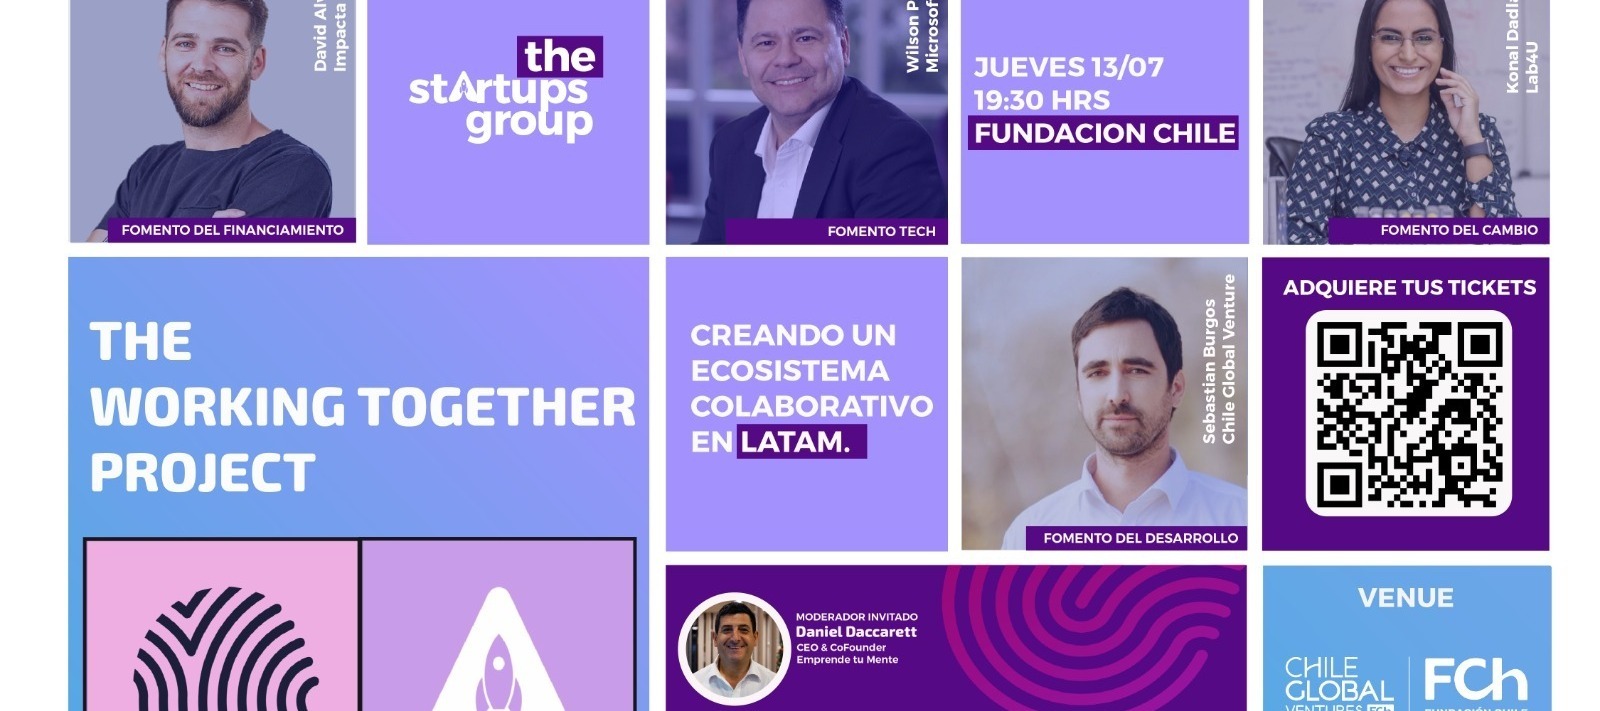 ⚡Concurso Flash⚡The WORKING TOGETHER Project🌎